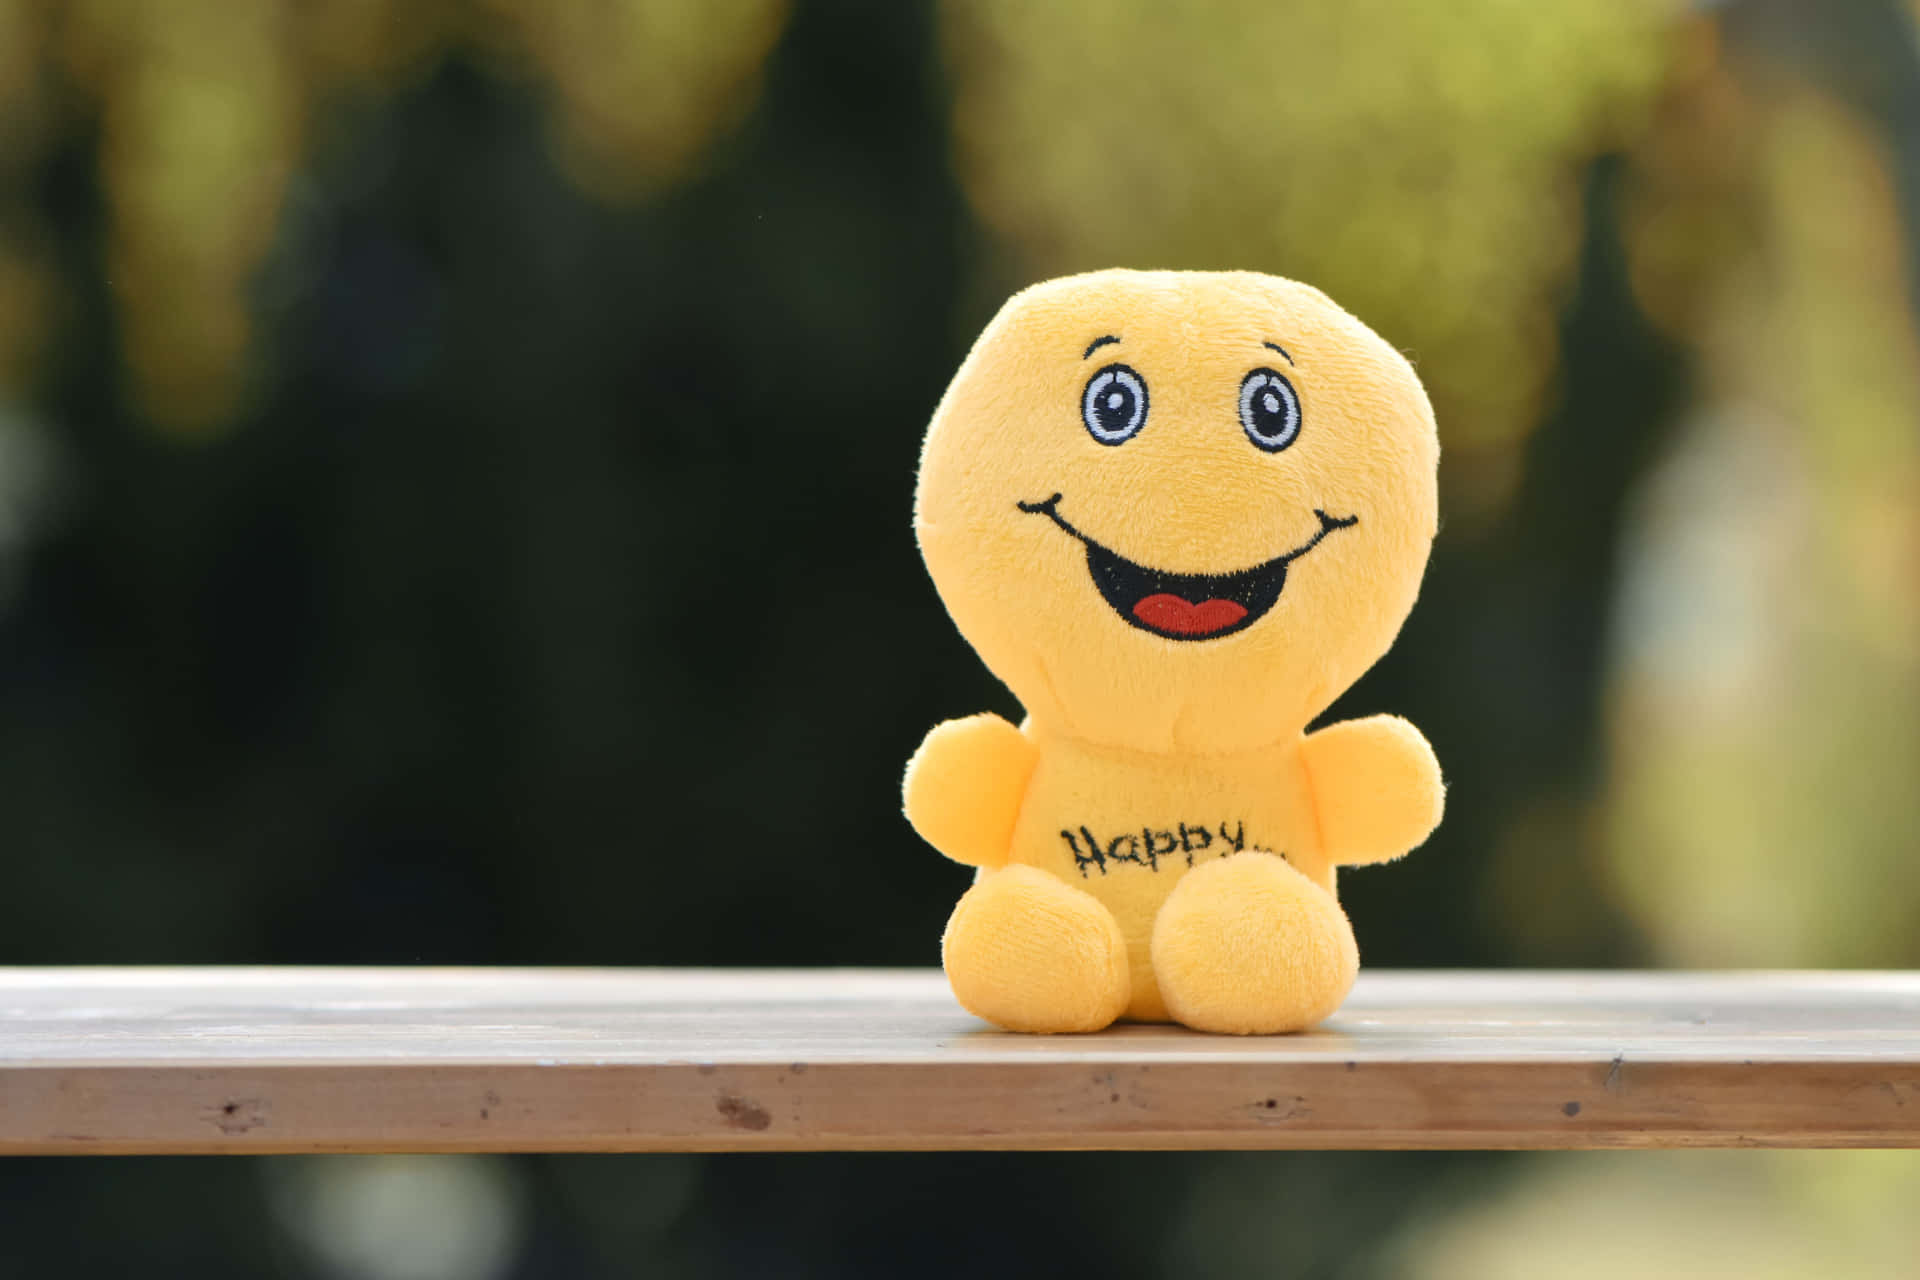 A Yellow Stuffed Animal With The Word Happy On It